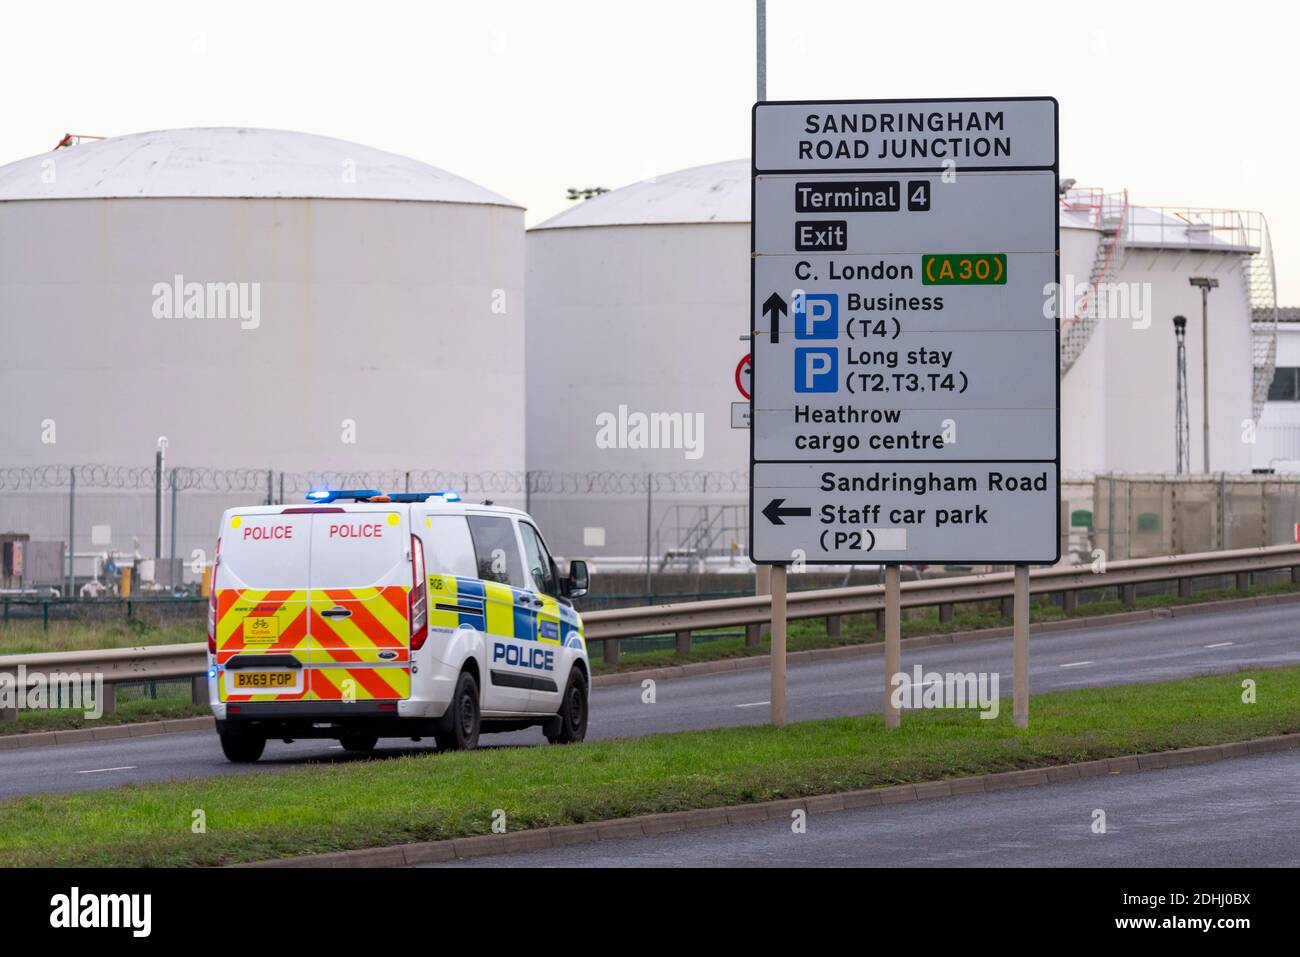 Police responding to an incident at the Sandringham Road Fuel Farm entrance at London Heathrow Airport, UK, close to the fuel tanks. Security Stock Photo